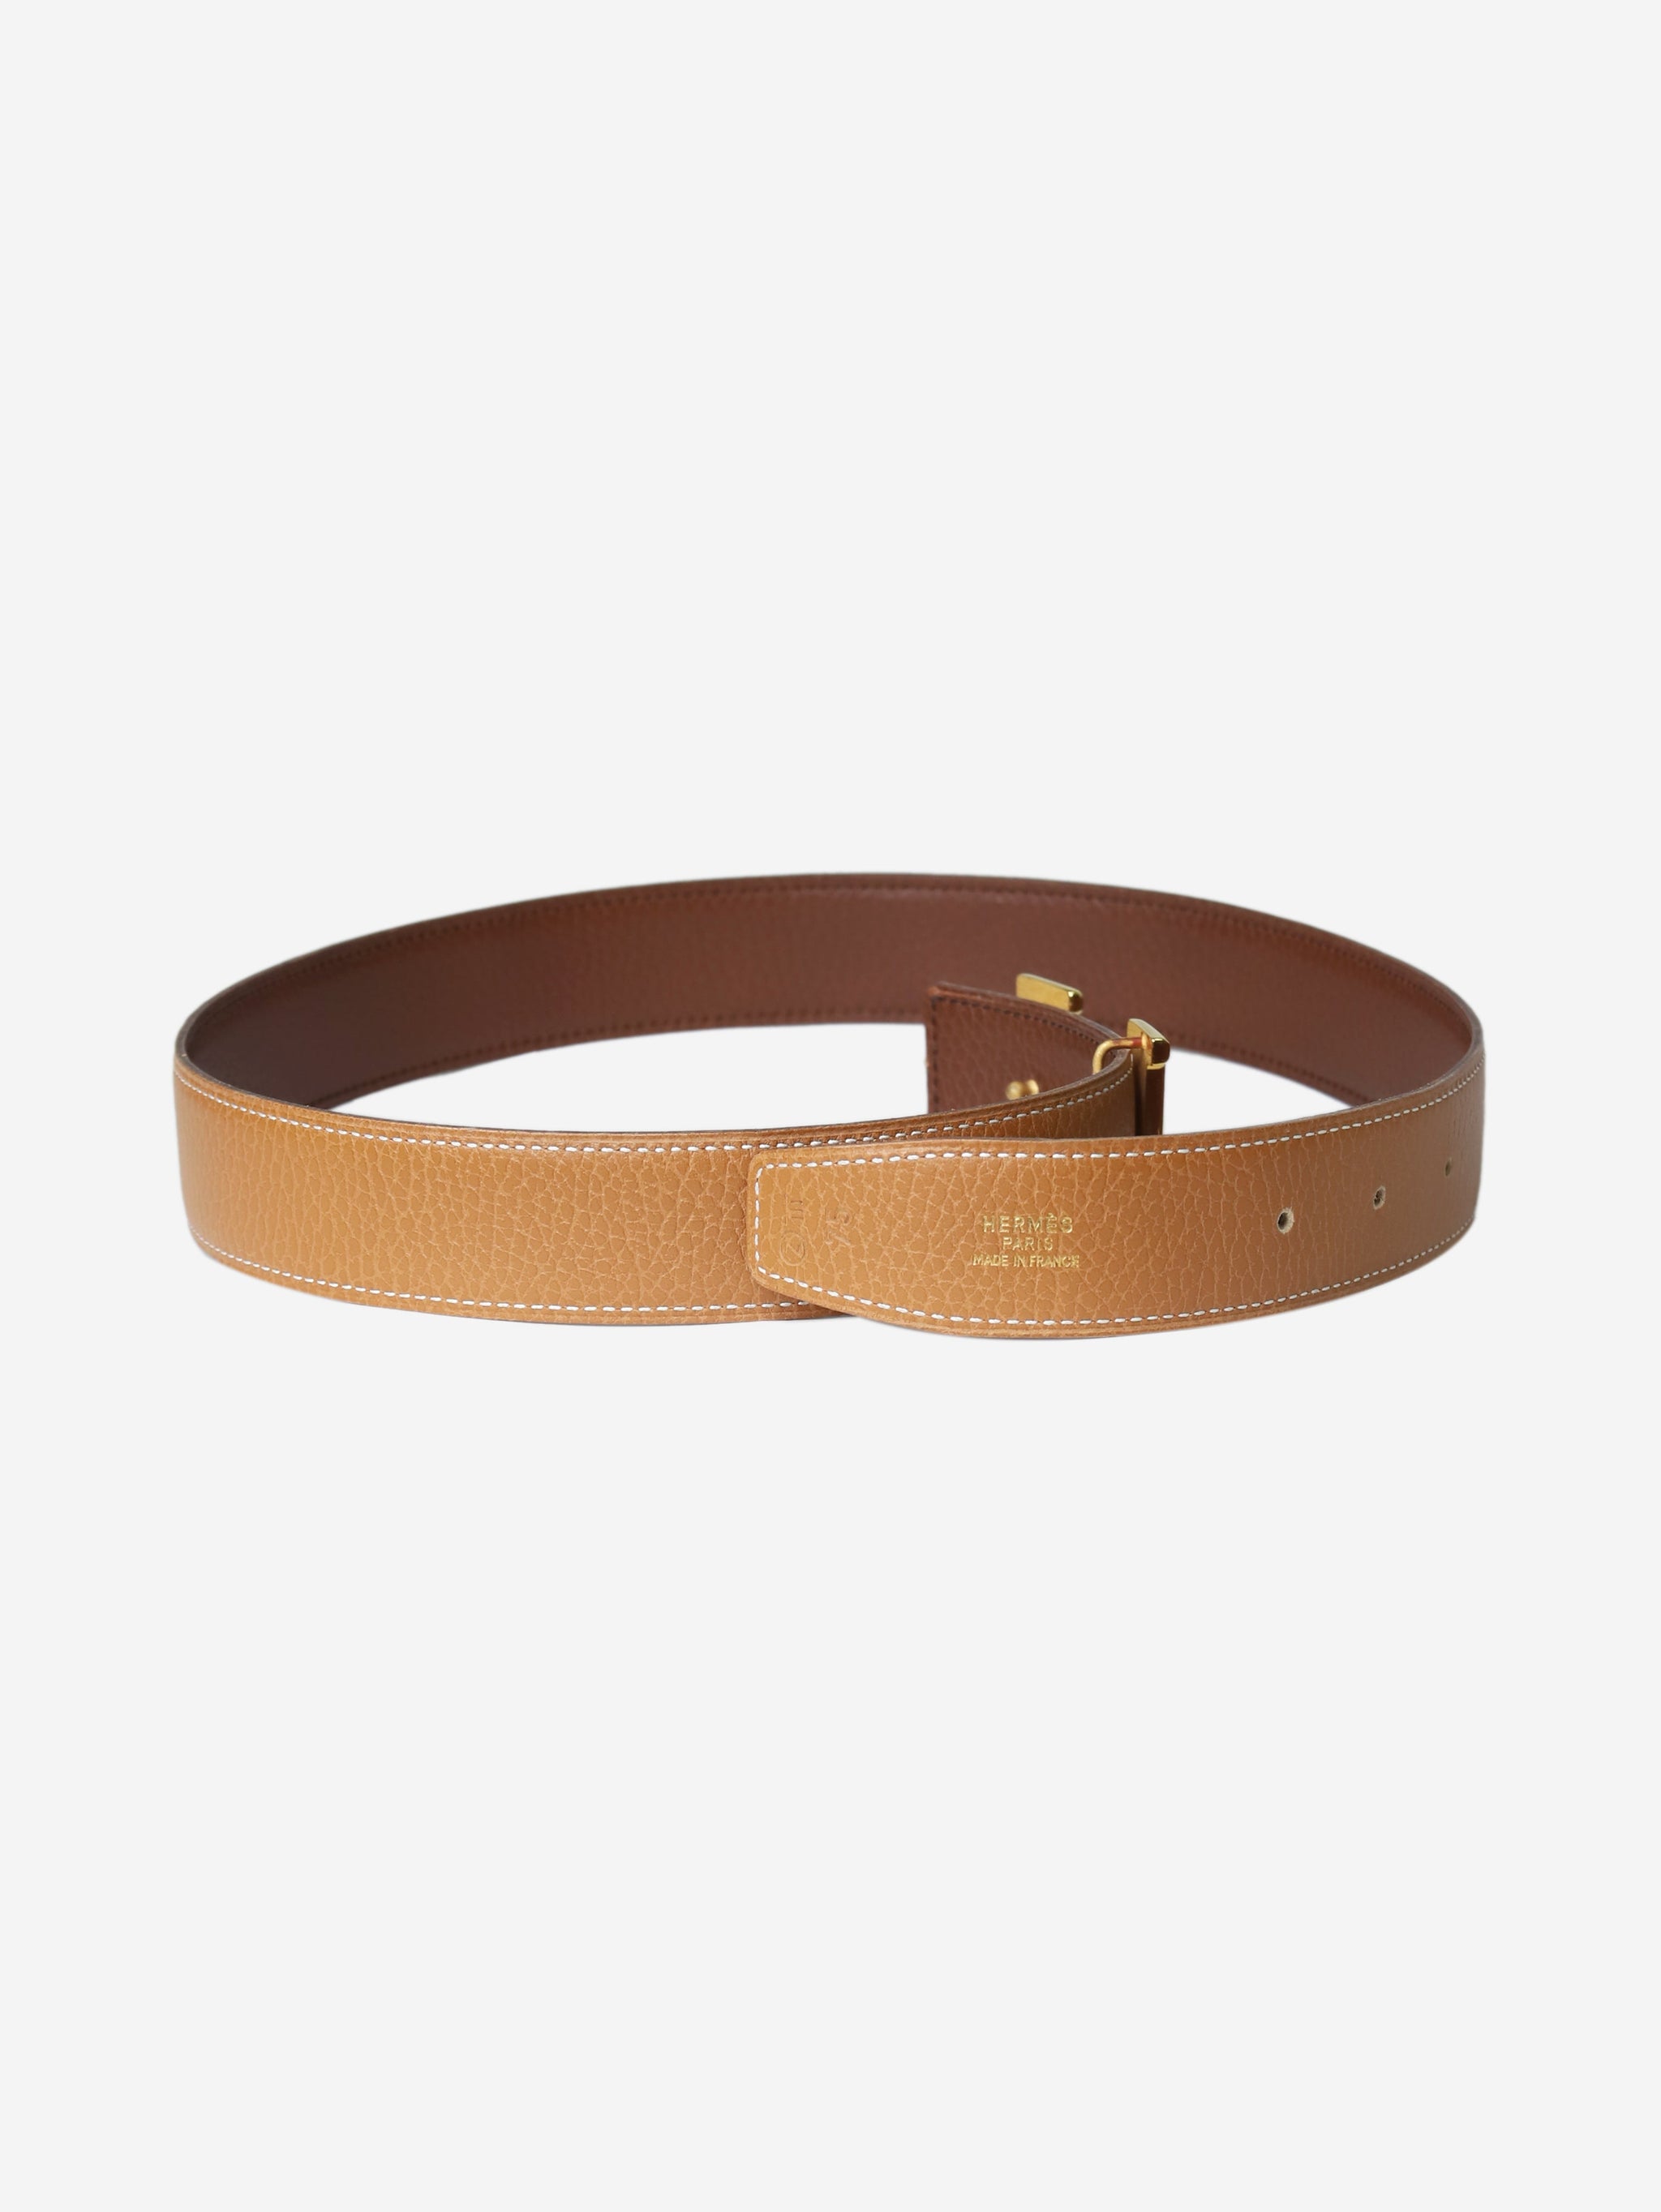 Hermes pre-owned brown H belt buckle - size | Sign of the Times